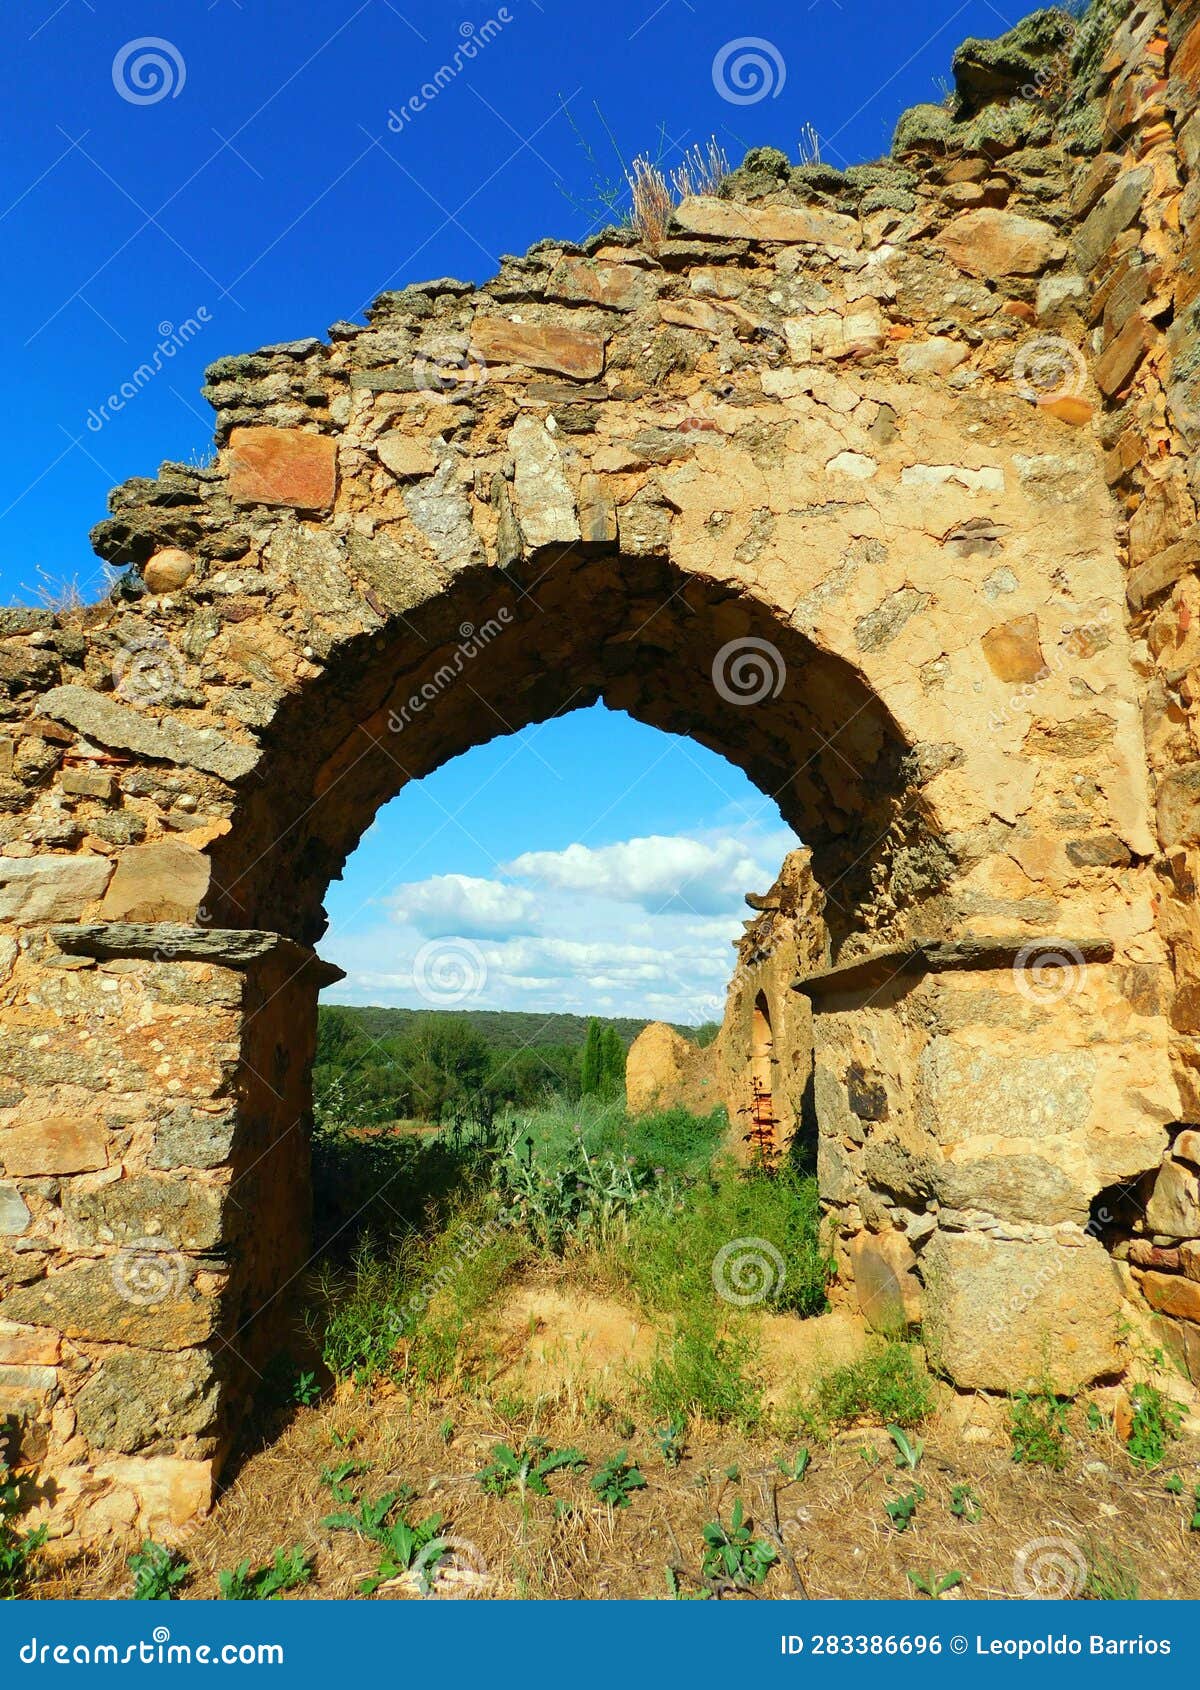 ruins of a ancient church in zamora province